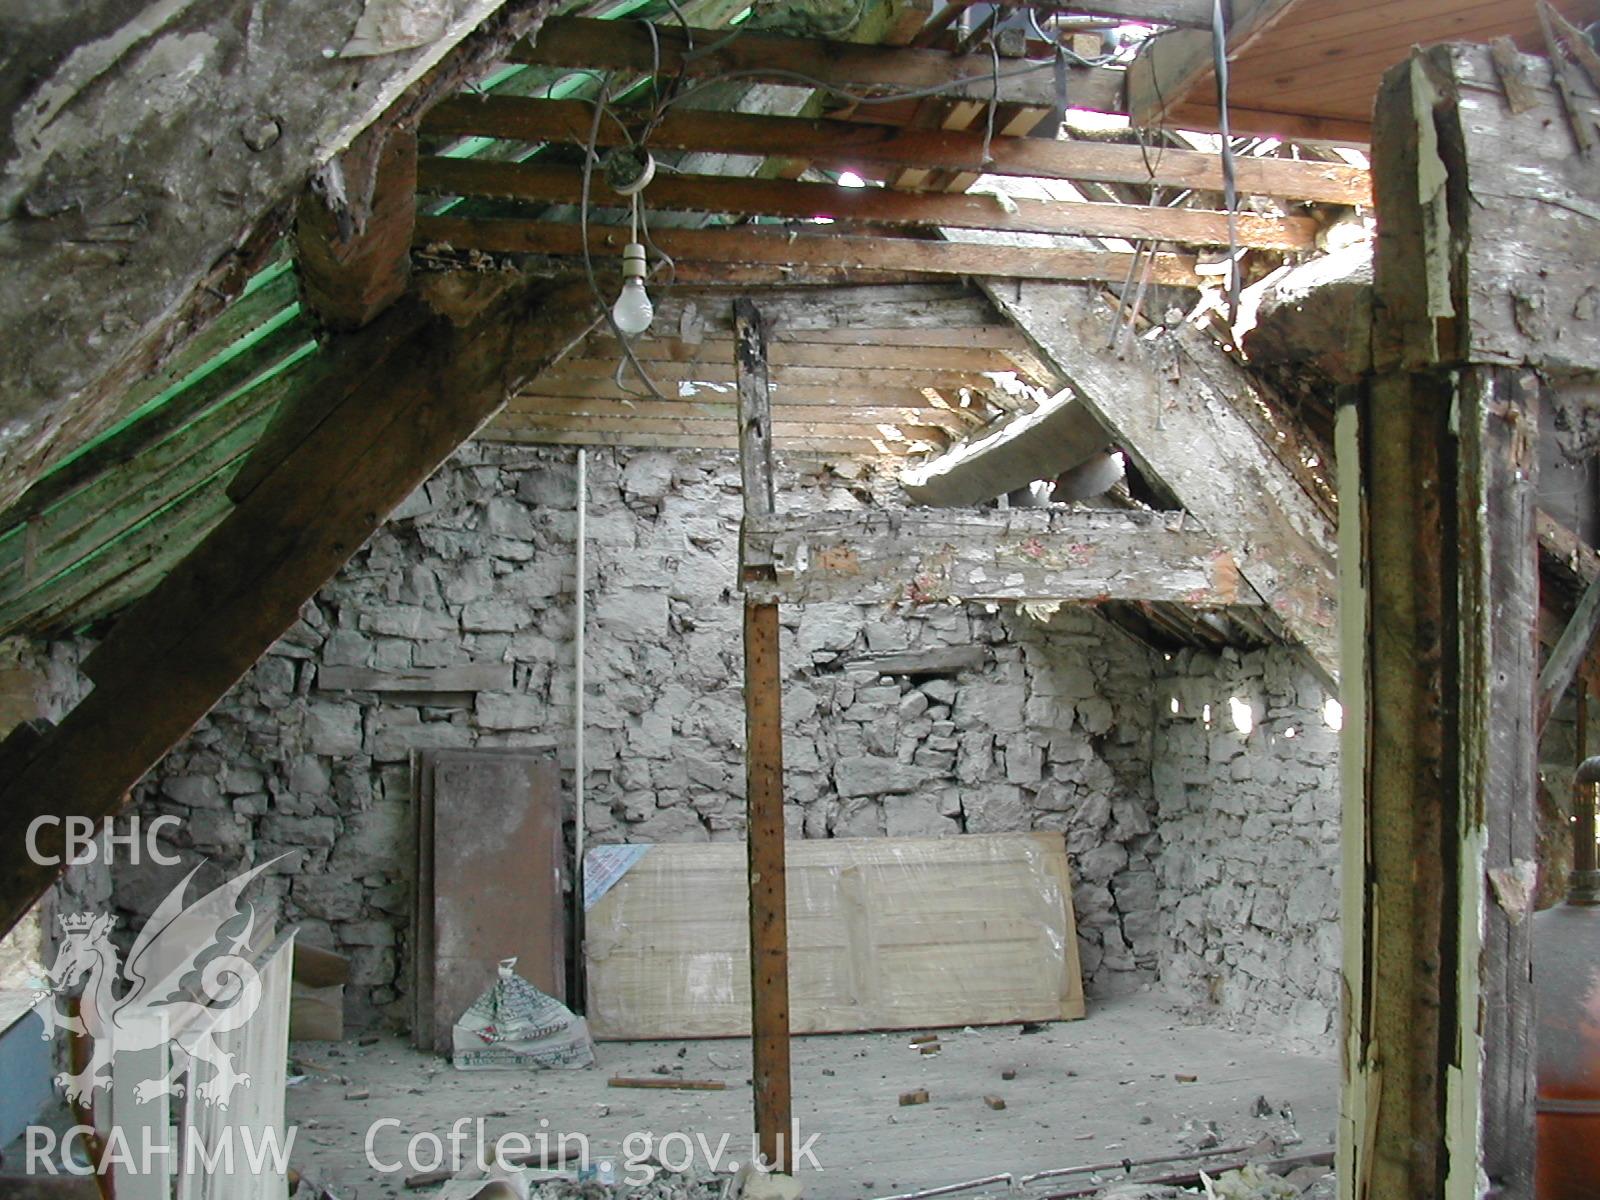 Colour photograph showing detailed interior view of attic at Rosacre, Gronant, Prestatyn. Unknown date. Donated by the Conservation Department of Flintshire County Council, in advance of relocation to new offices.